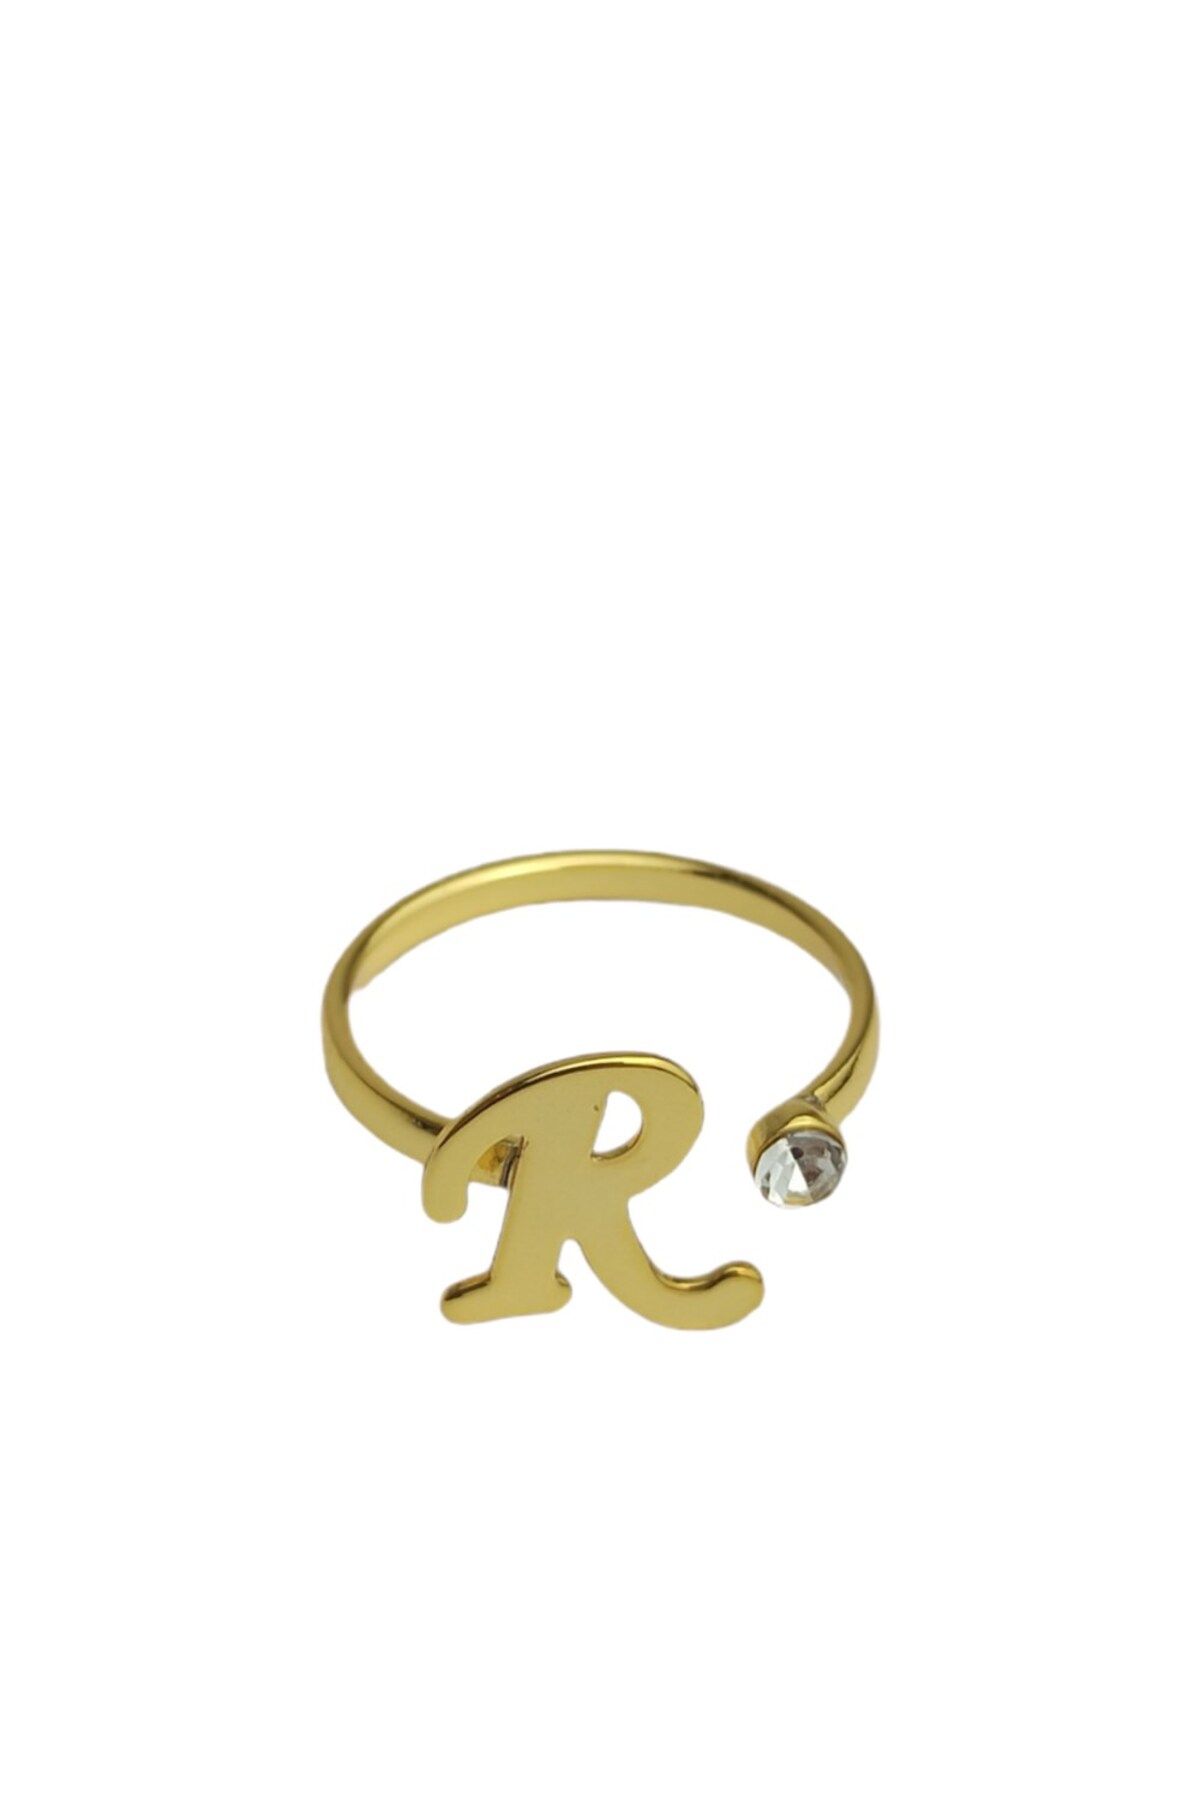 Buy R Letter Ring, Dainty Oval Signet Ring Made of 14k Gold, Solid Gold,  Ring for Women Online in India - Etsy